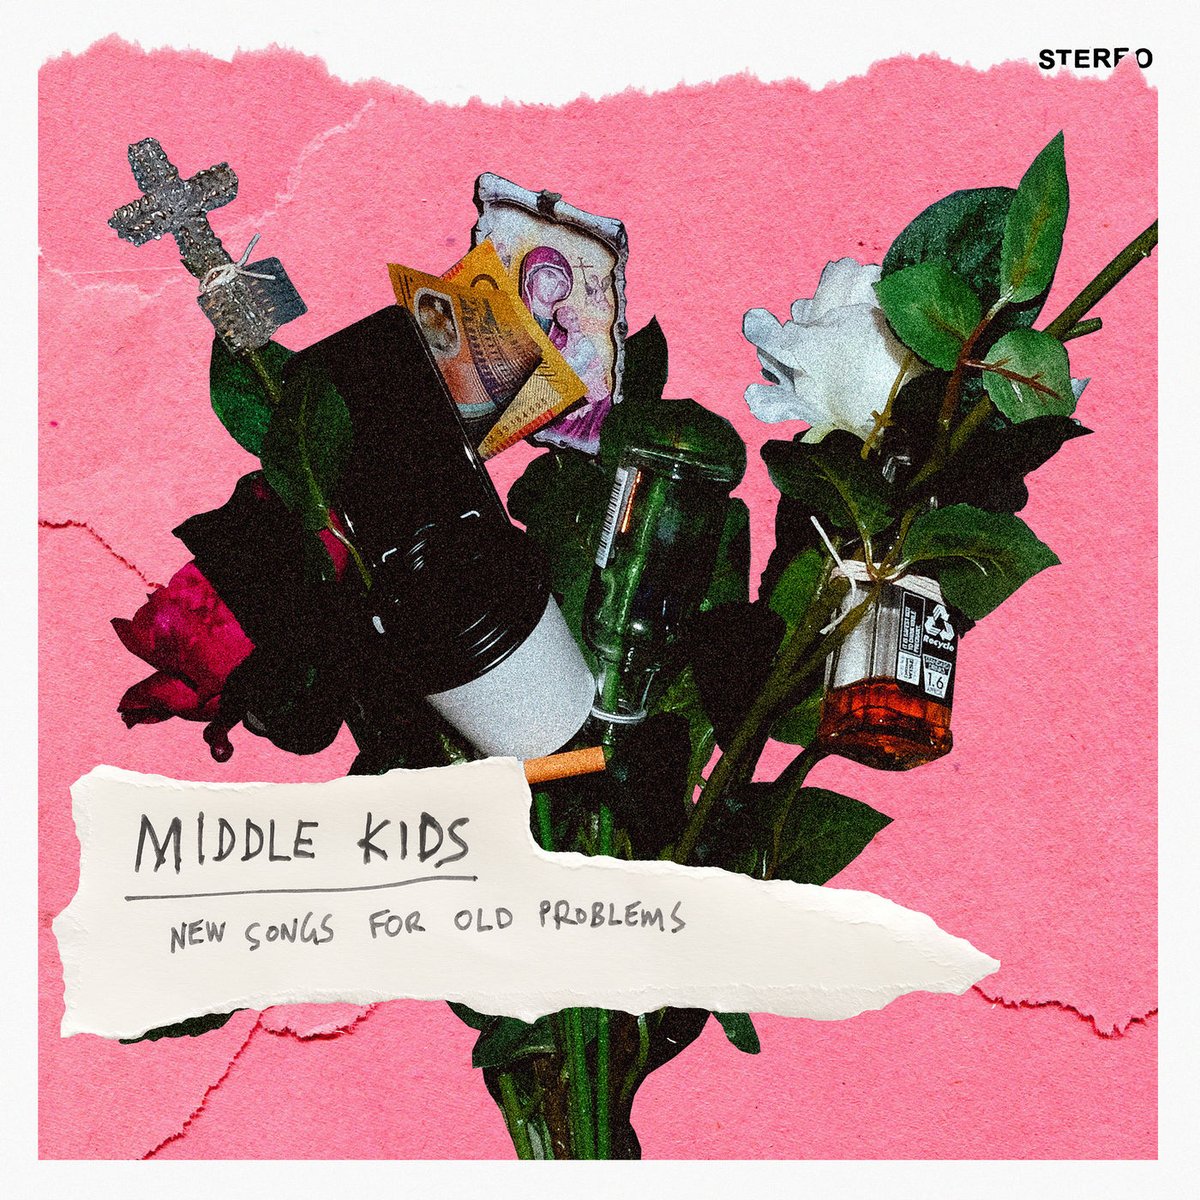 On this day in 2019, @MiddleKidsMusic released the New Songs For Old Problems EP. This was the first music I heard by the band, absolutely loved this EP and had to listen to their other stuff. Fantastic band and highly recommended.